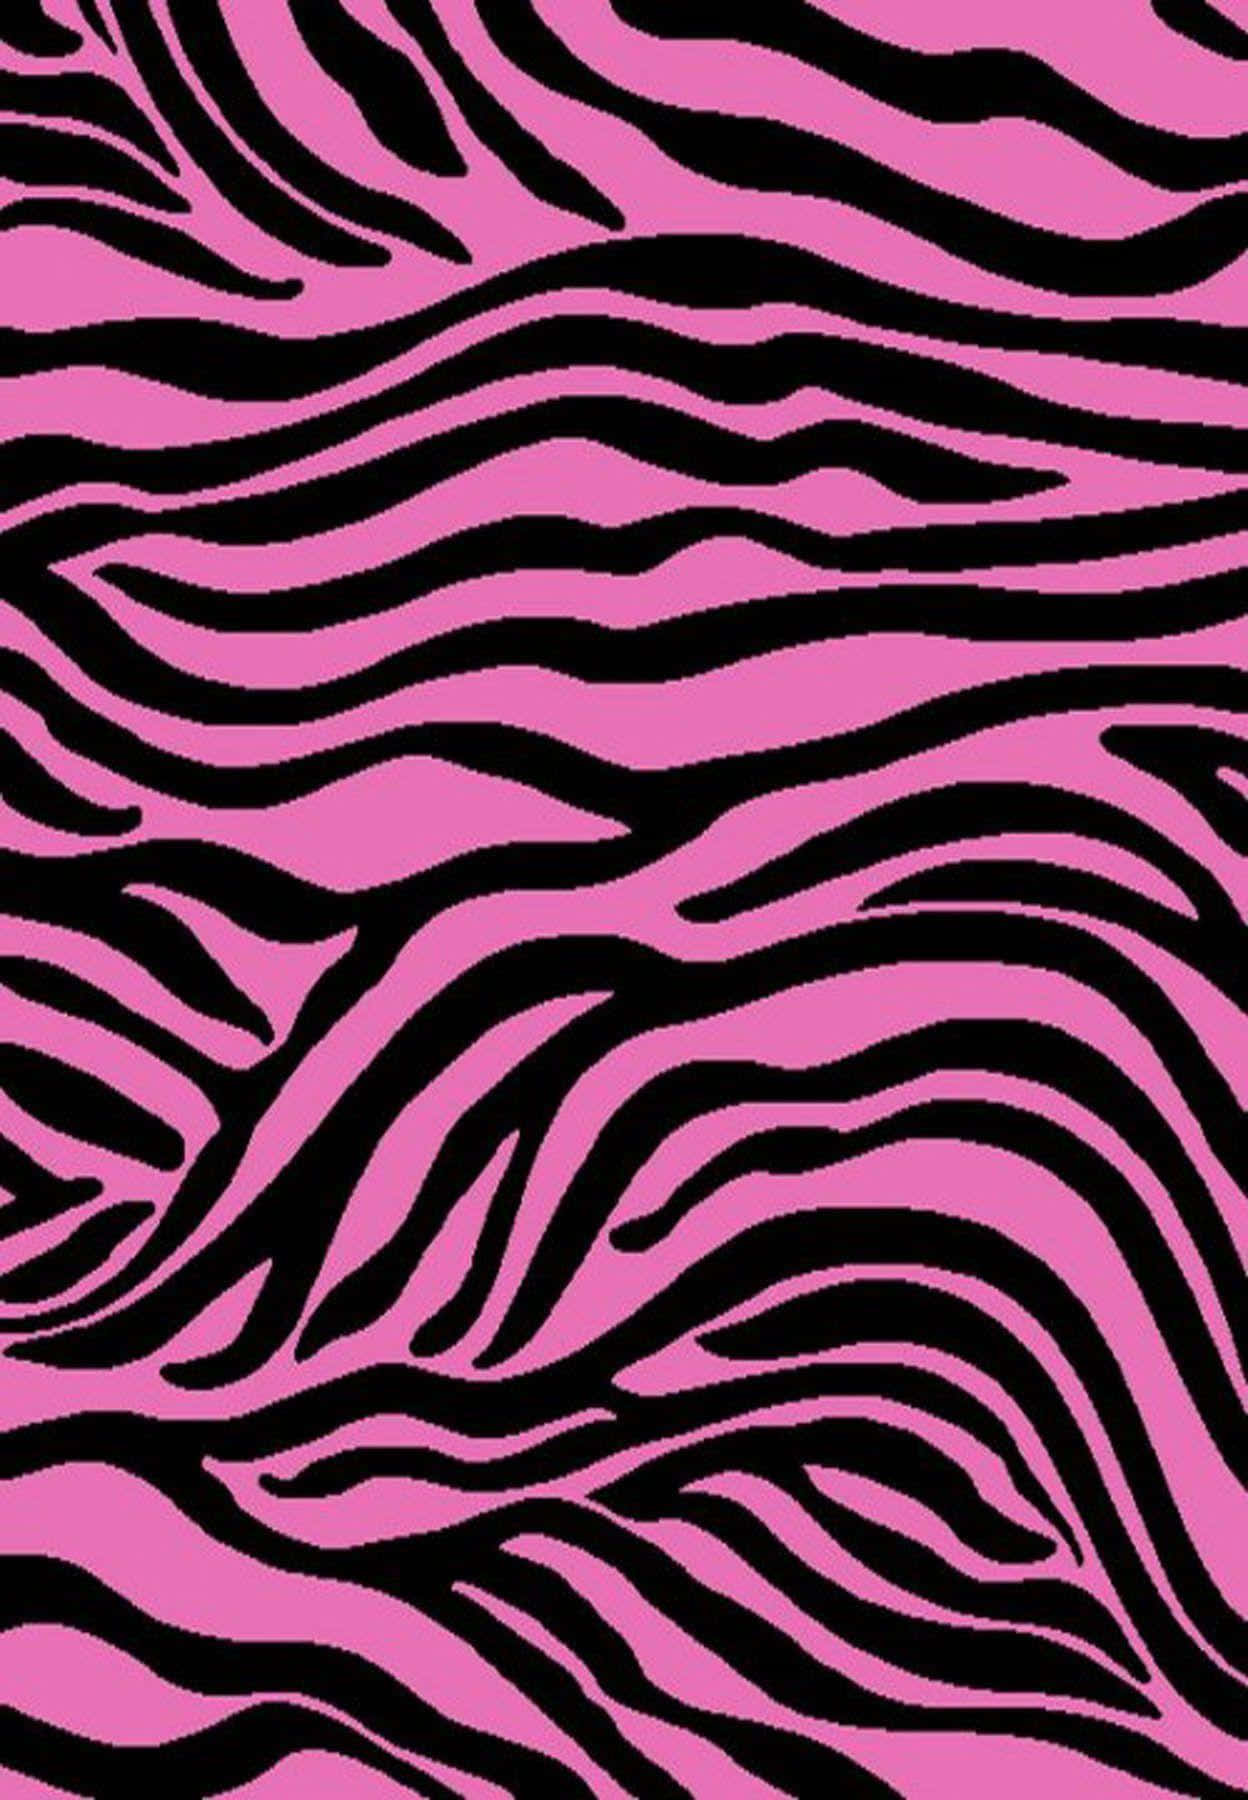 Wildly Colorful - Pink Zebra Pattern